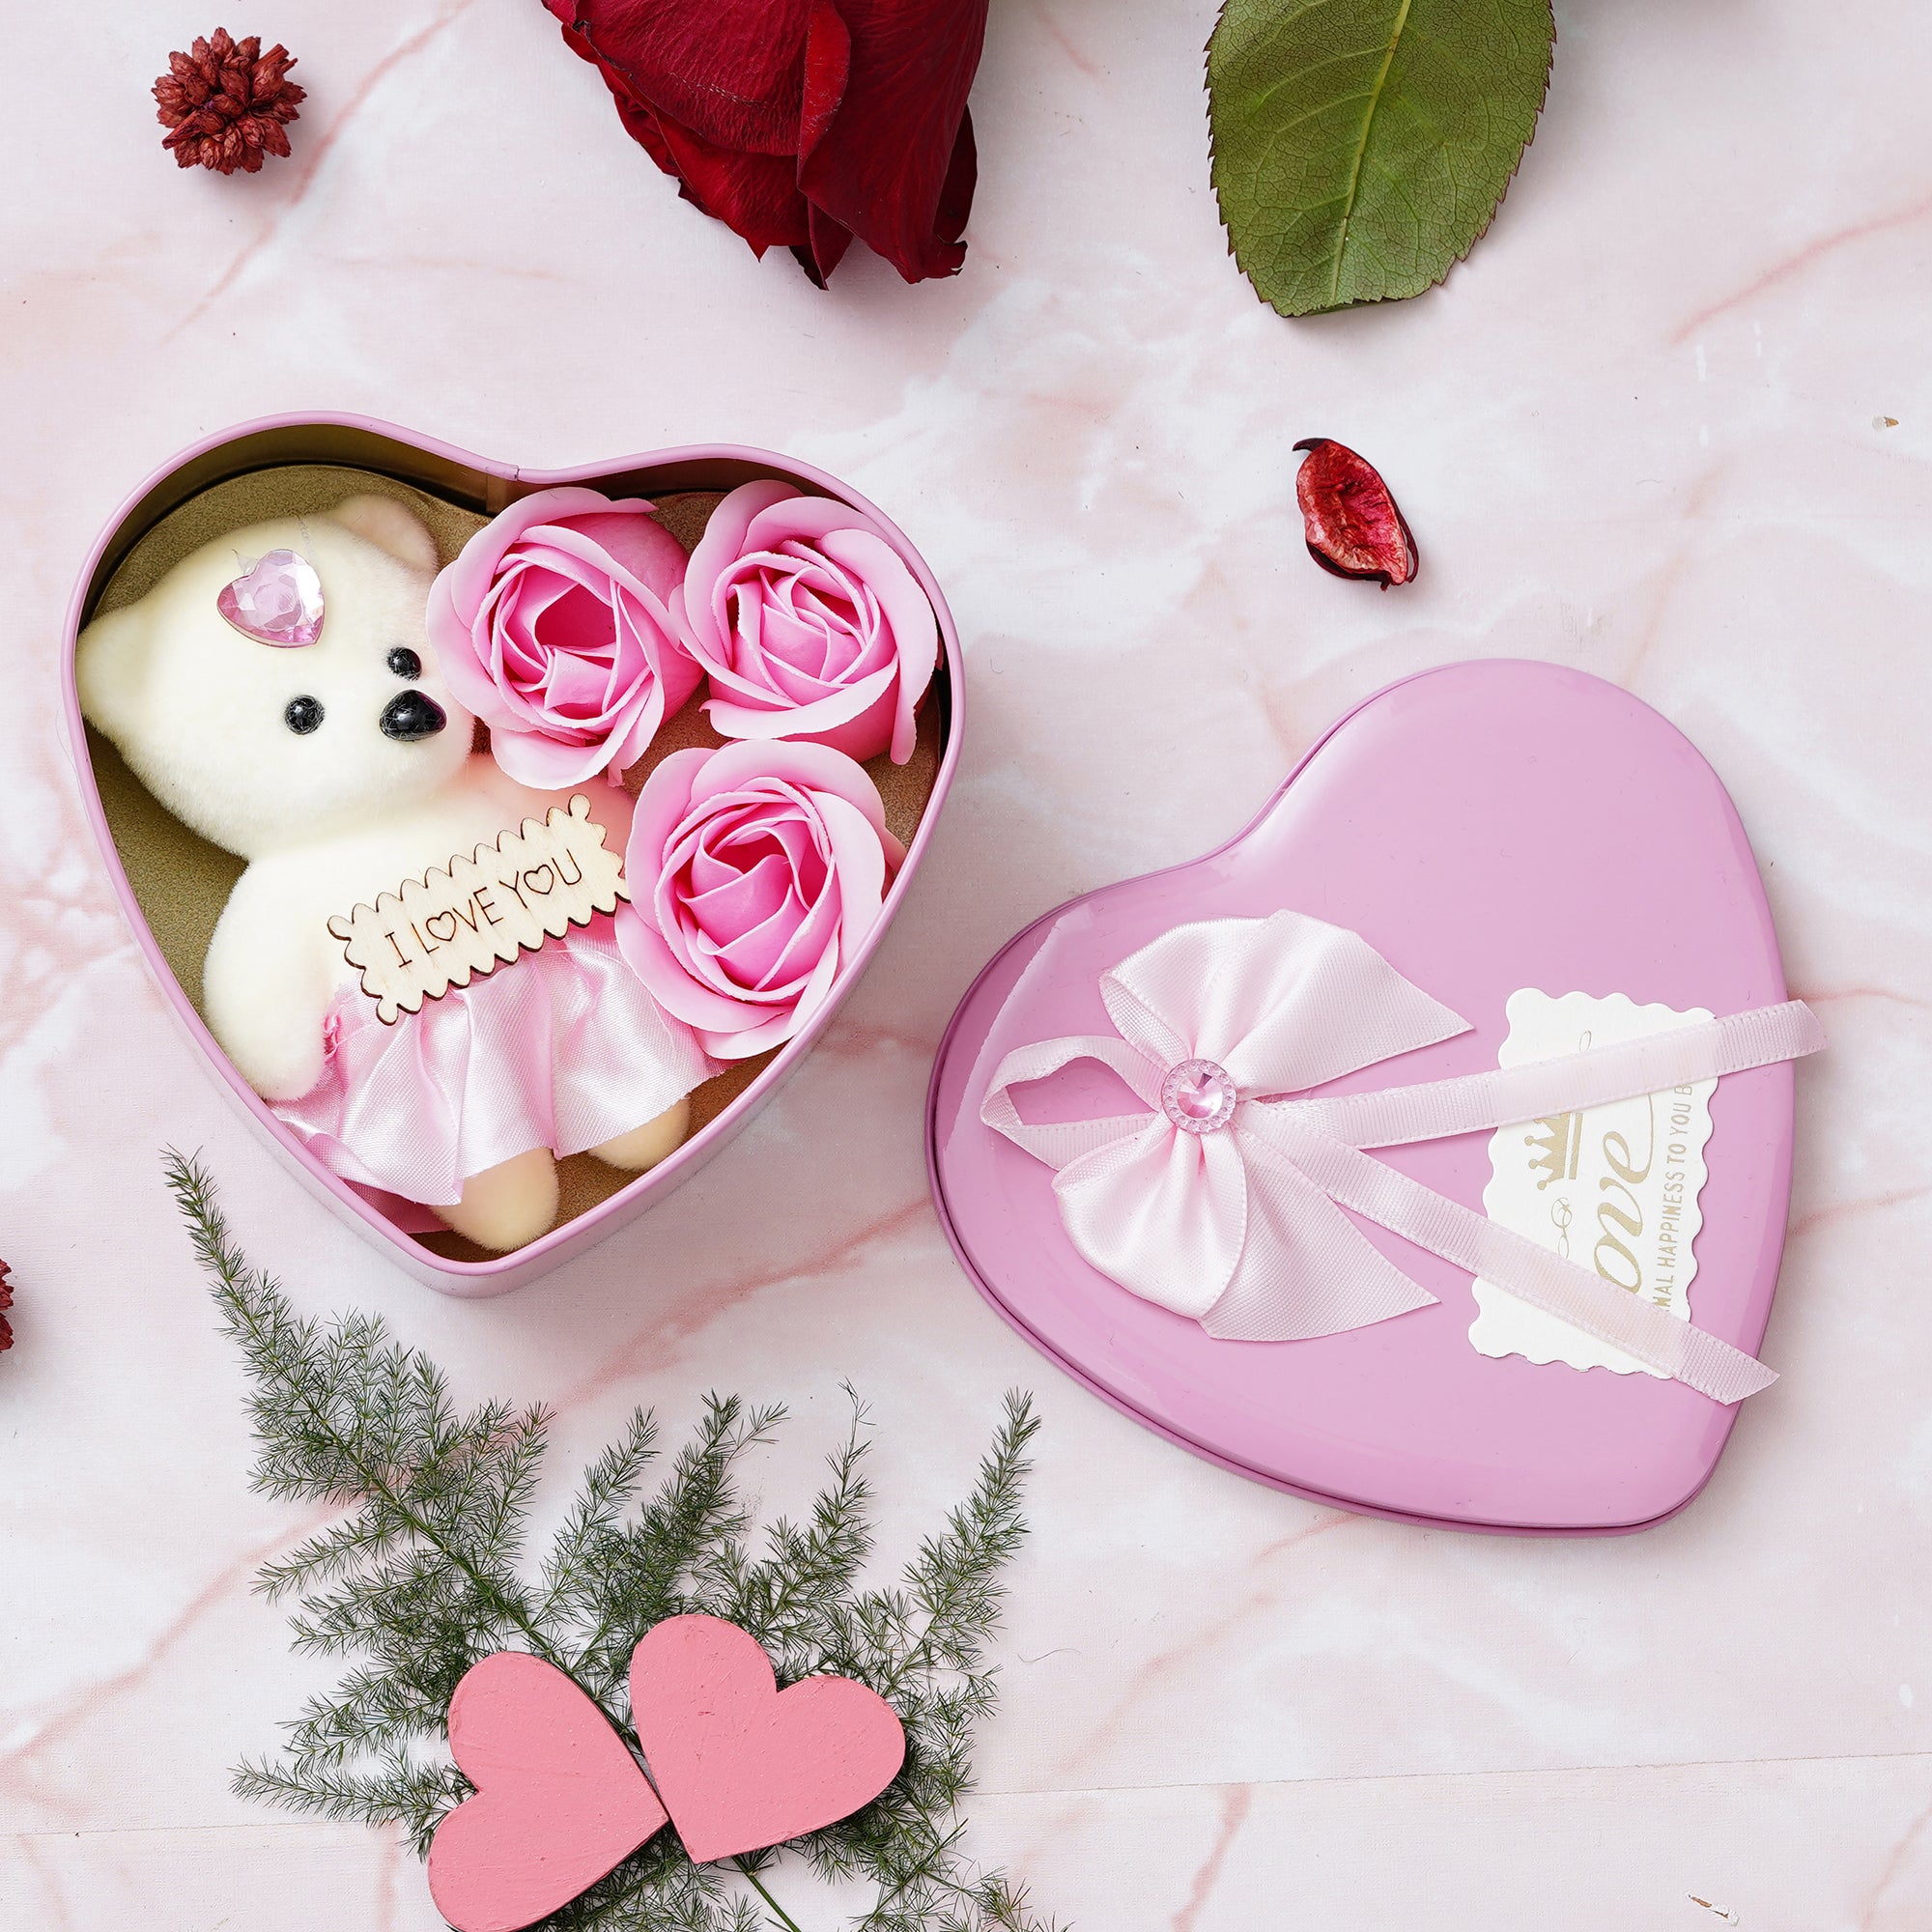 Valentine Combo of Golden Rose Gift Set, "My Heart Beats Only For You" Wooden Showpiece With Stand, Pink Heart Shaped Gift Box with Teddy and Roses 5